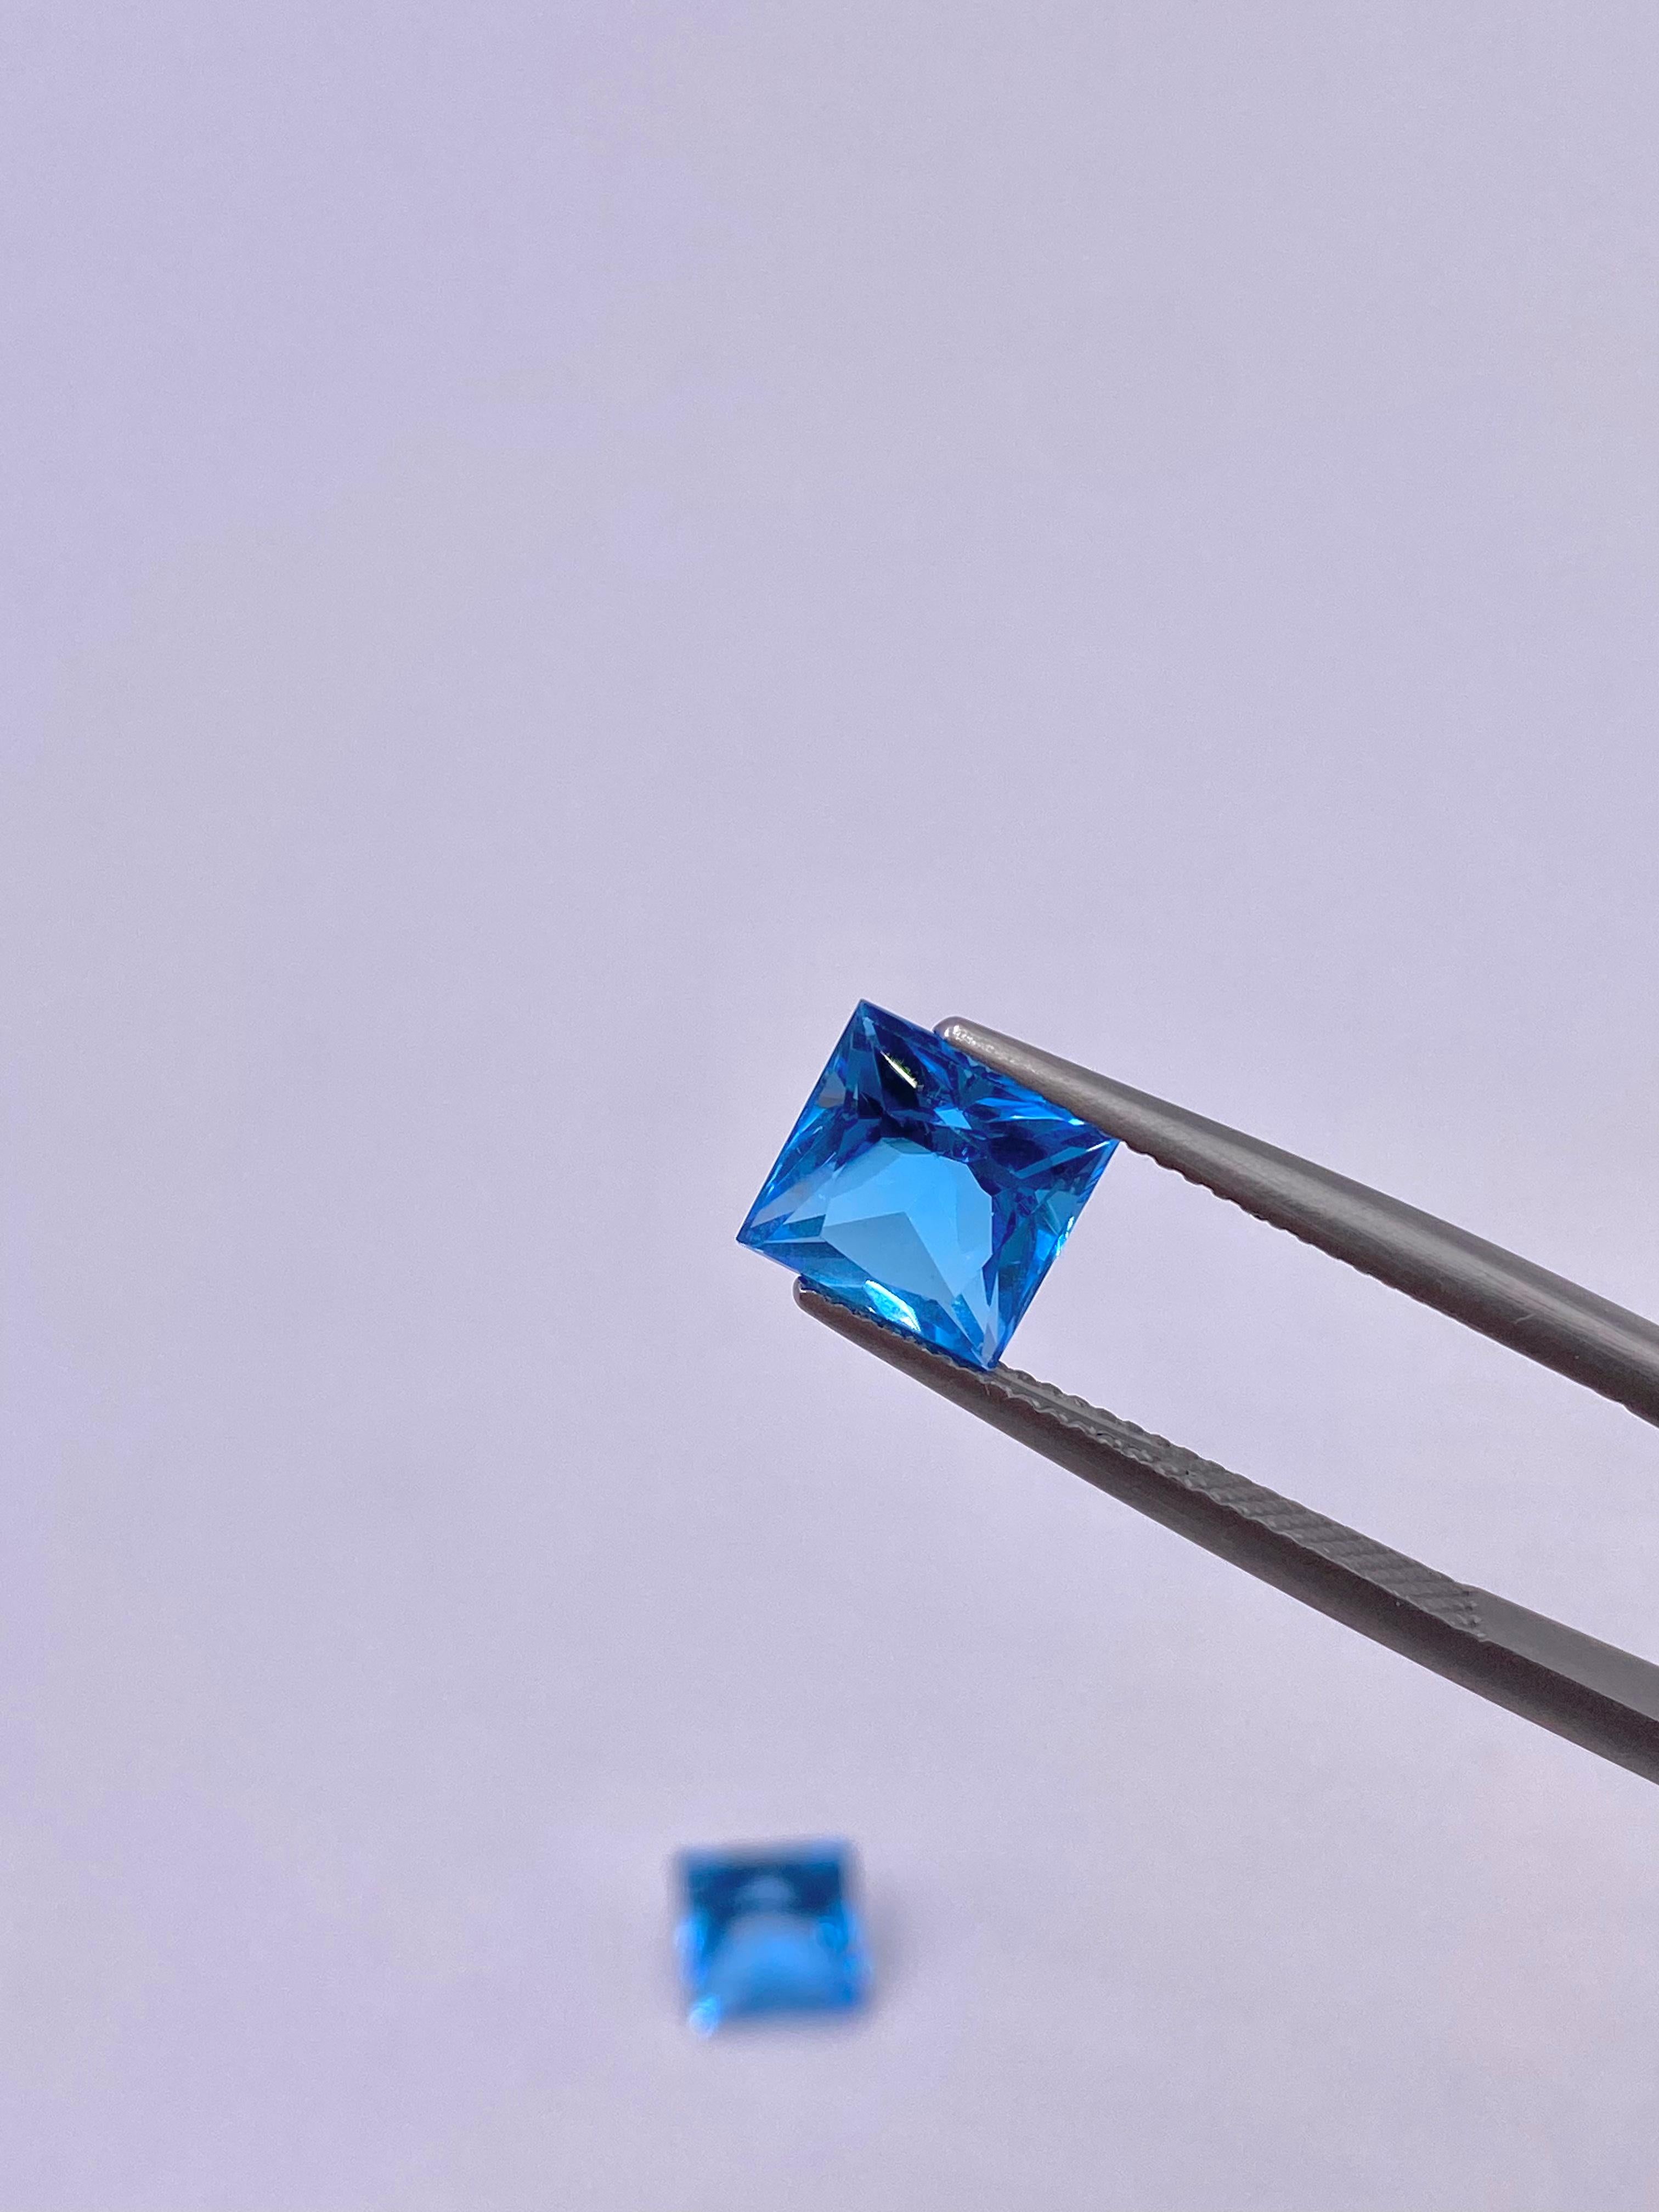 Two square cut 7.05 and 7.02 Carat Brazilian Blue Topaz

Measuring approximately 10.80 x 10.90 mm with striking Swiss blue color( medium-dark bluish-green)
 
